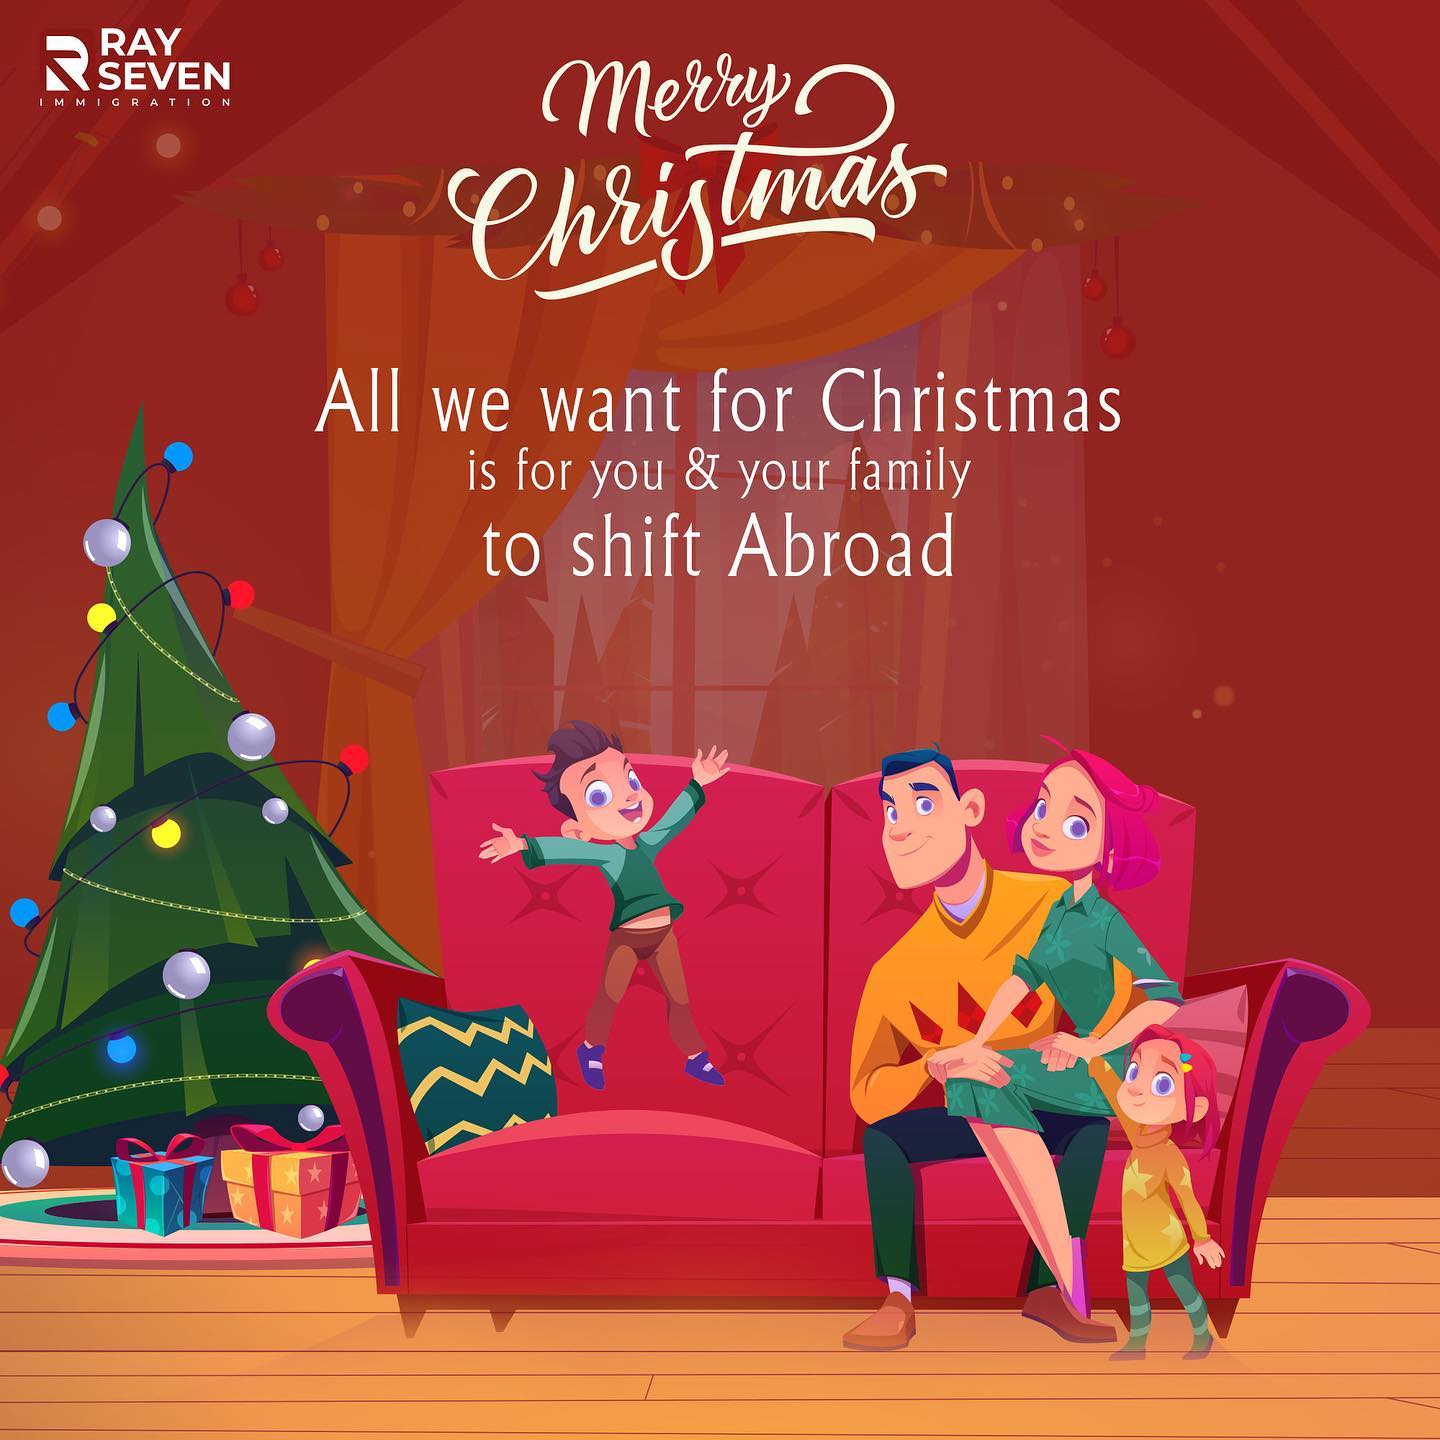 All we want for Christmas 🎶🎄
Merry Christmas, all. This Christmas we hope you decide shift to your dream destination abroad soon! Let us be your Santa🎅🏽 

#christmas #merrychristmas #merrychristmas🎄 #christmastree #immigration #ray7 #immigrants #settleabroad #abroad #H1b #ukimmigration #usimmigration #USVisa #visa